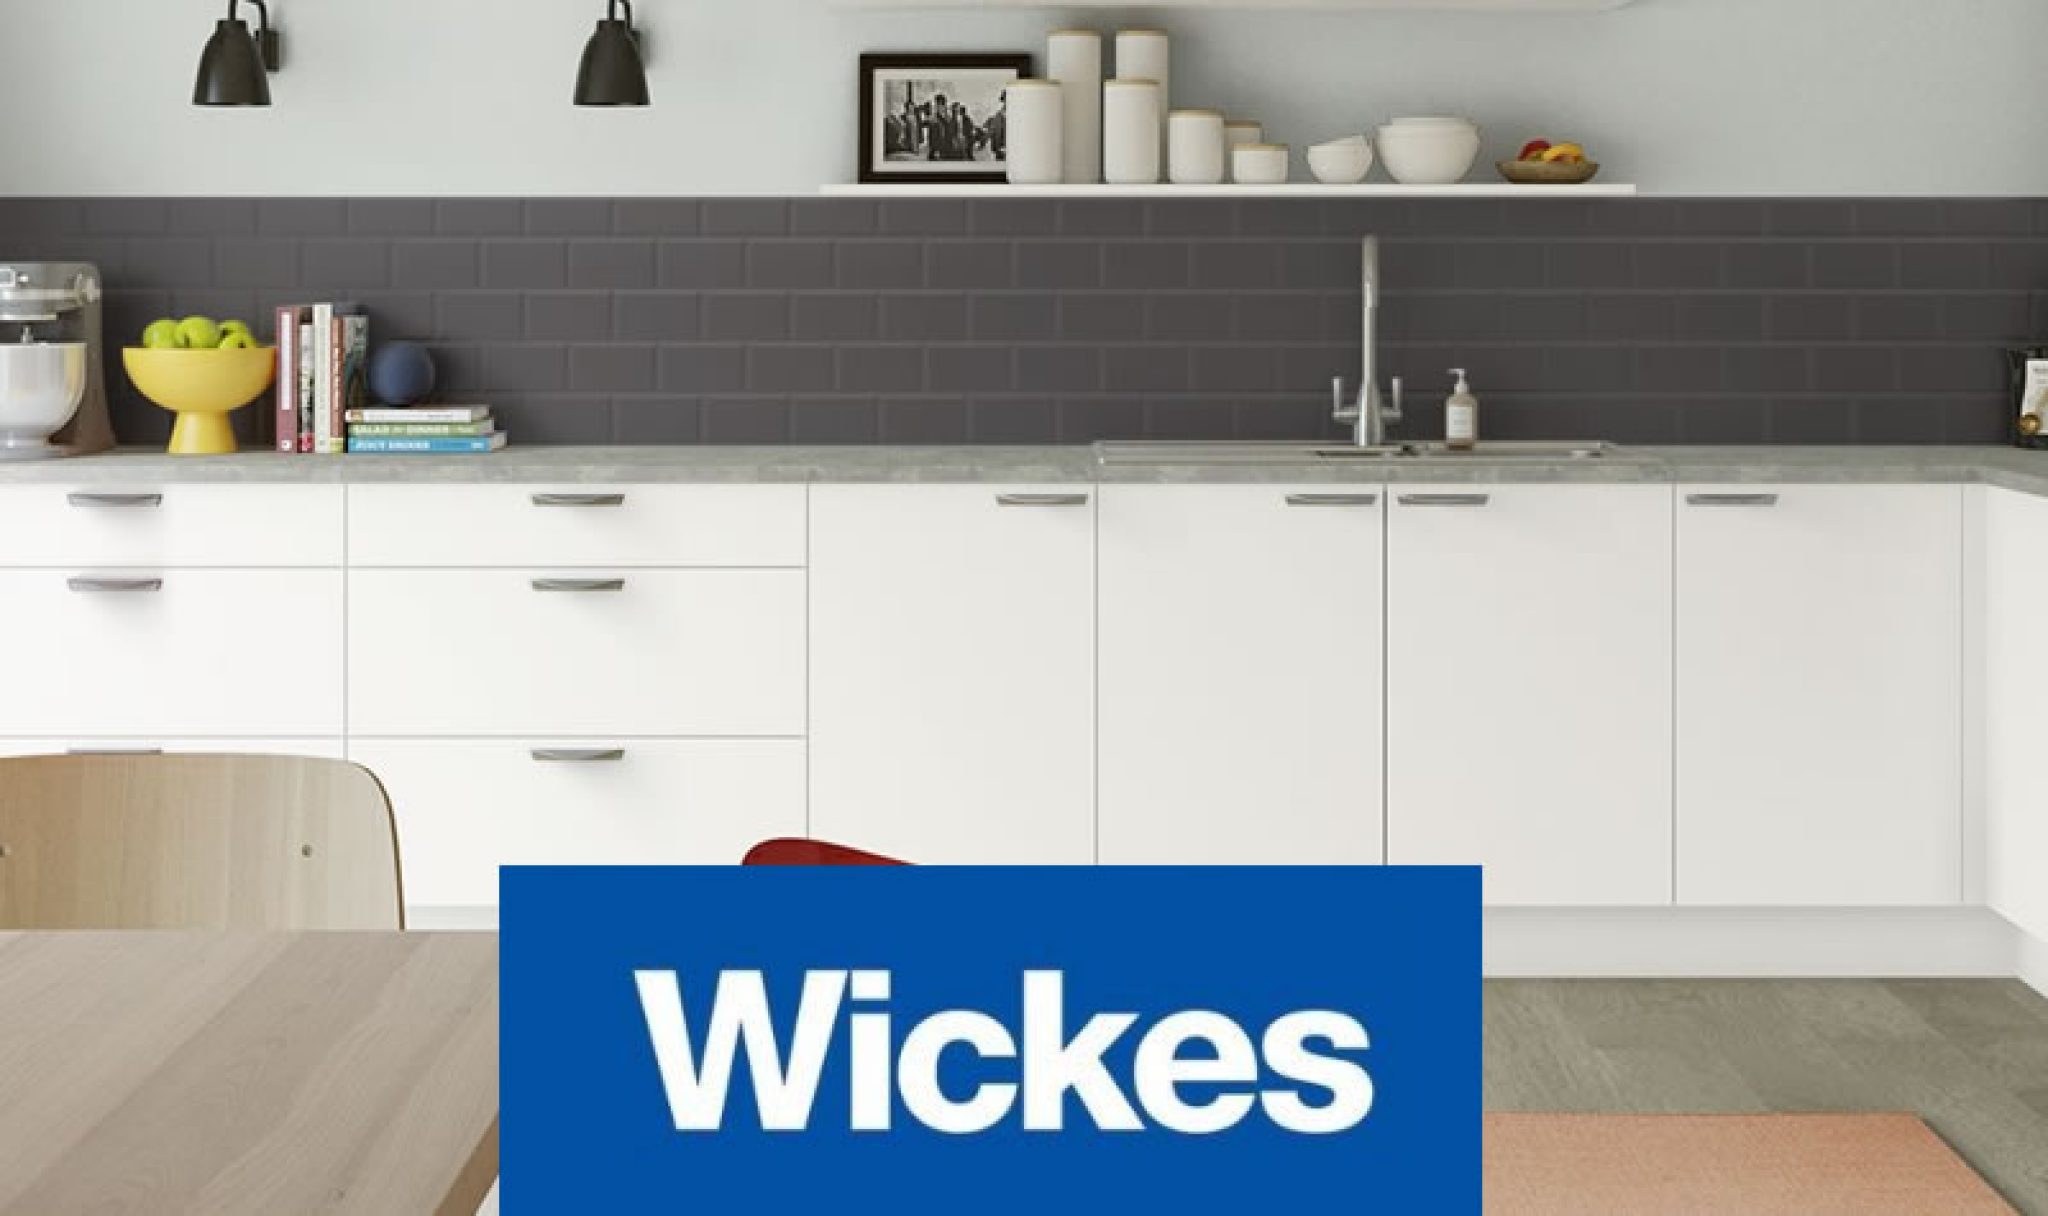 Wickes NHS Discount | What is the discount code for staff?